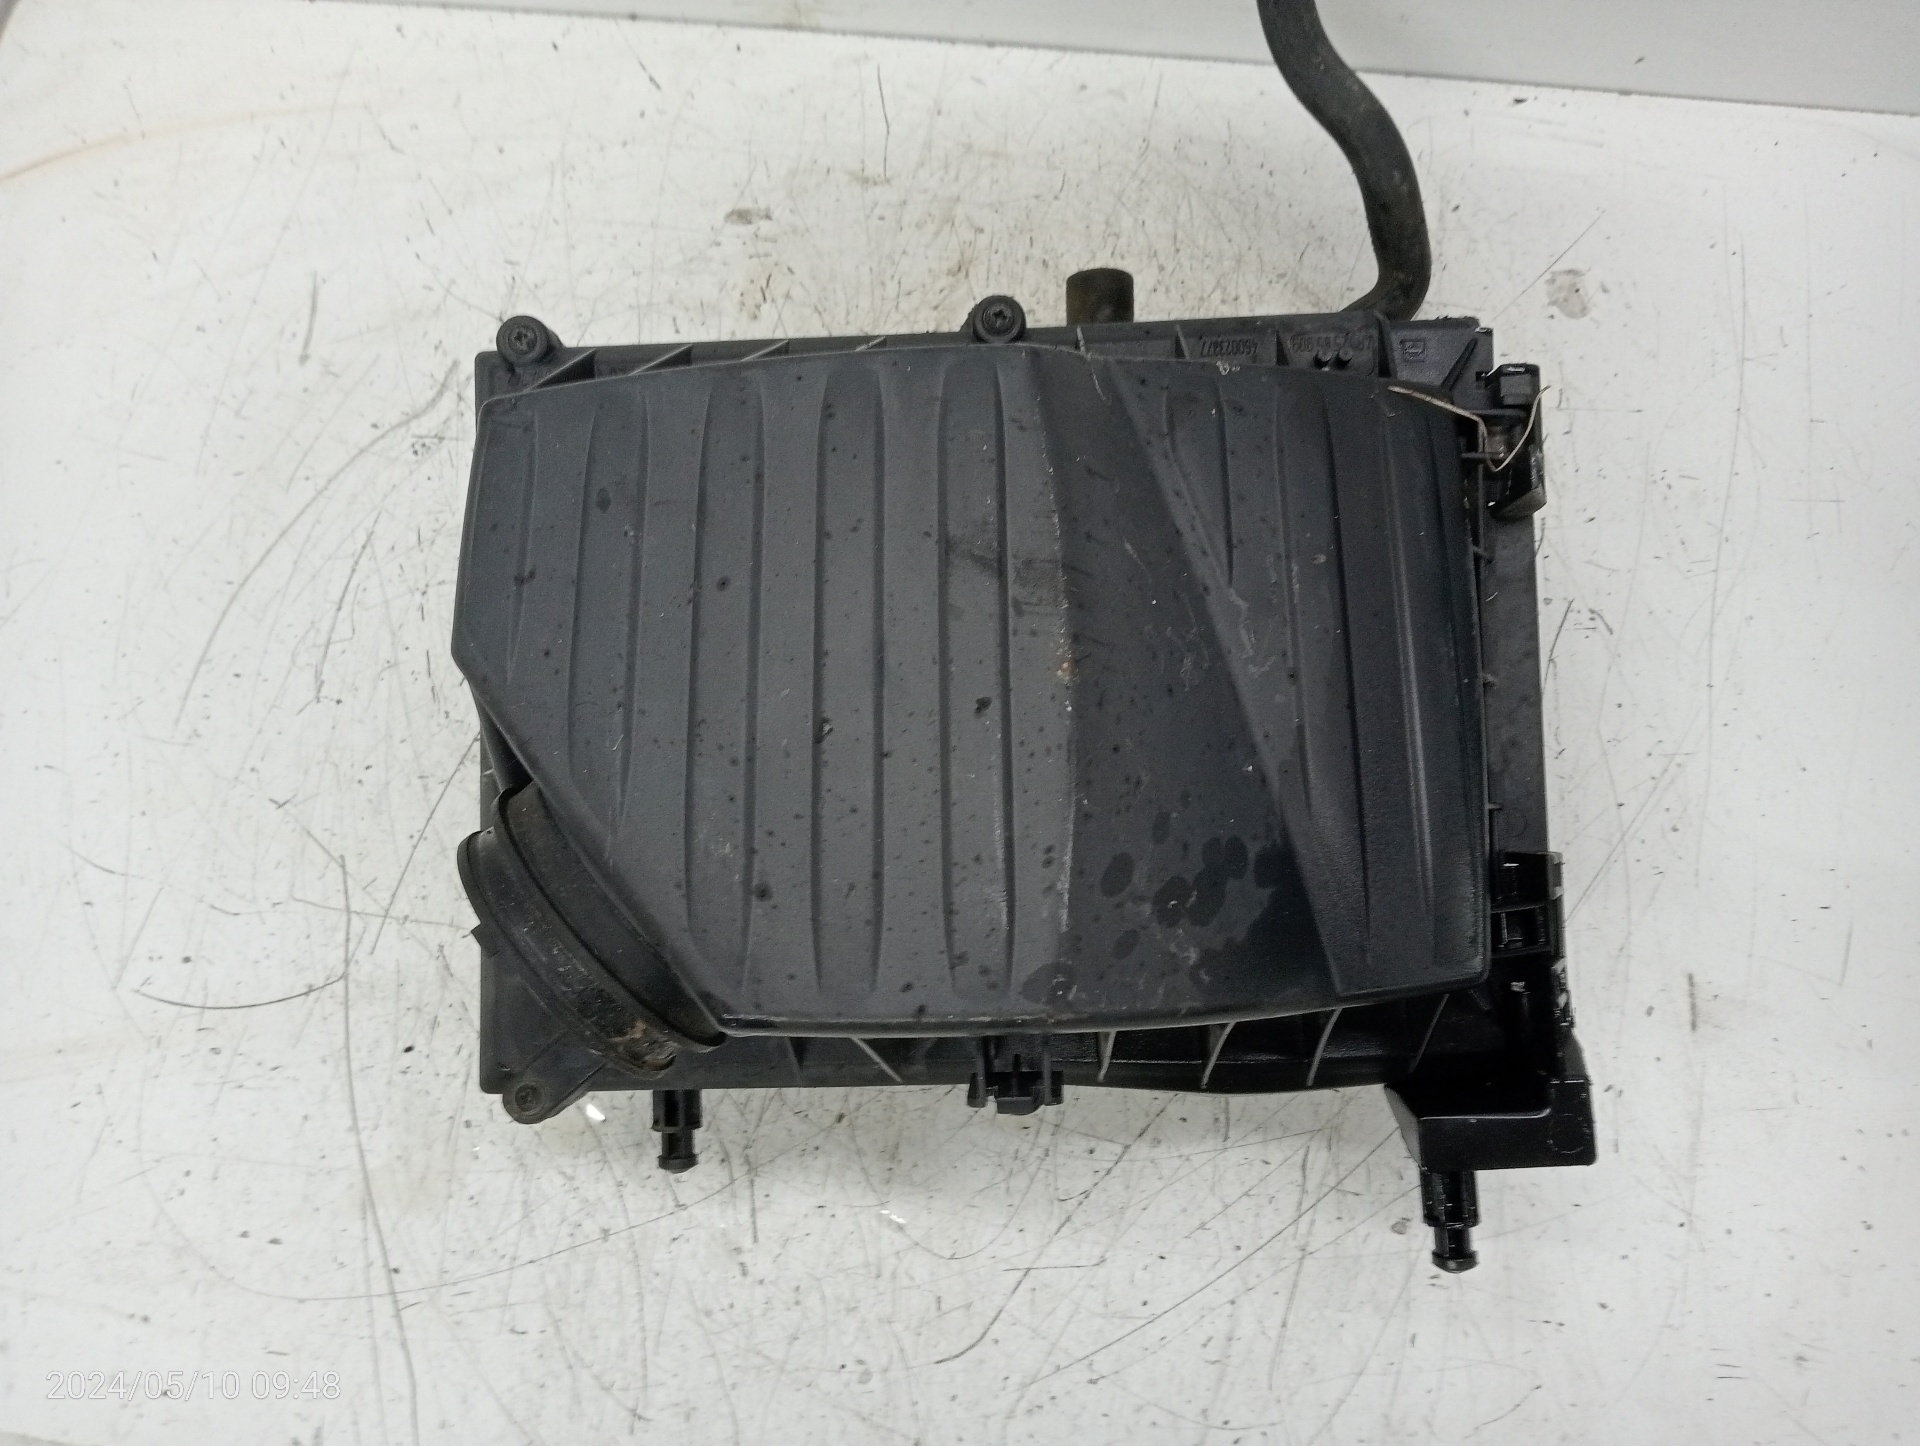 OPEL Meriva 1 generation (2002-2010) Other Engine Compartment Parts 4612585909 25393168